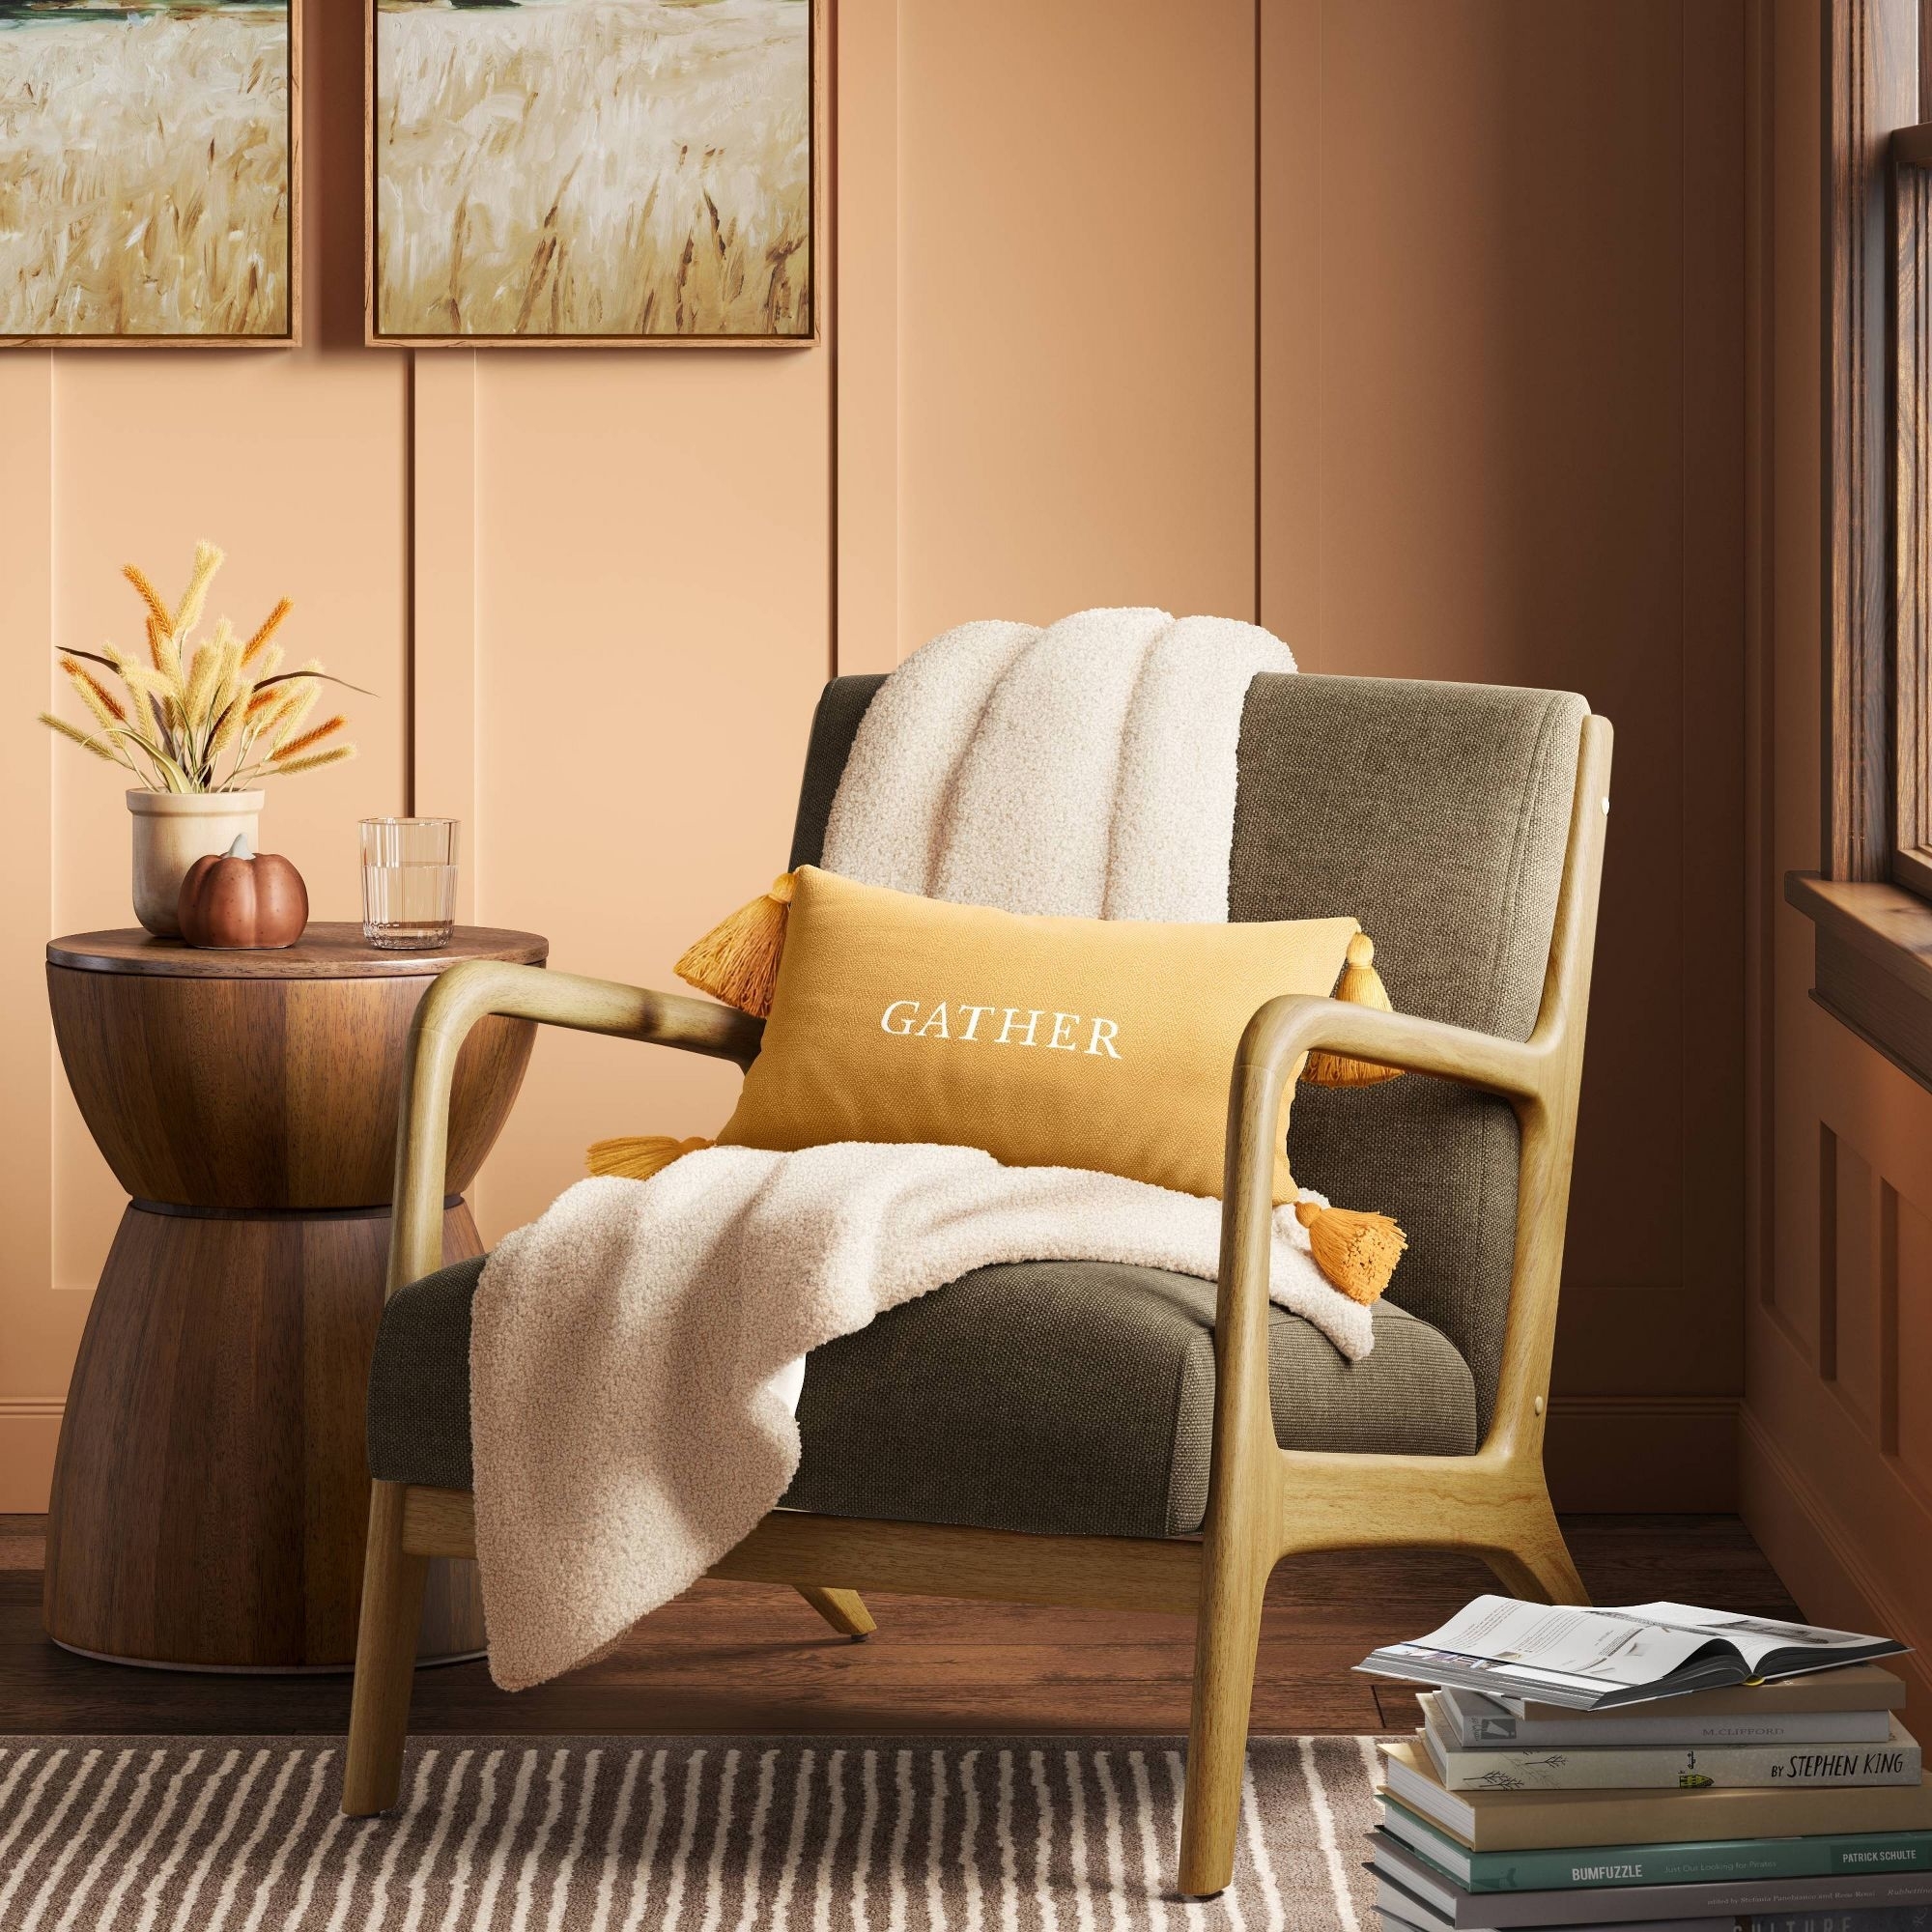 The throw in cream draped over an armchair